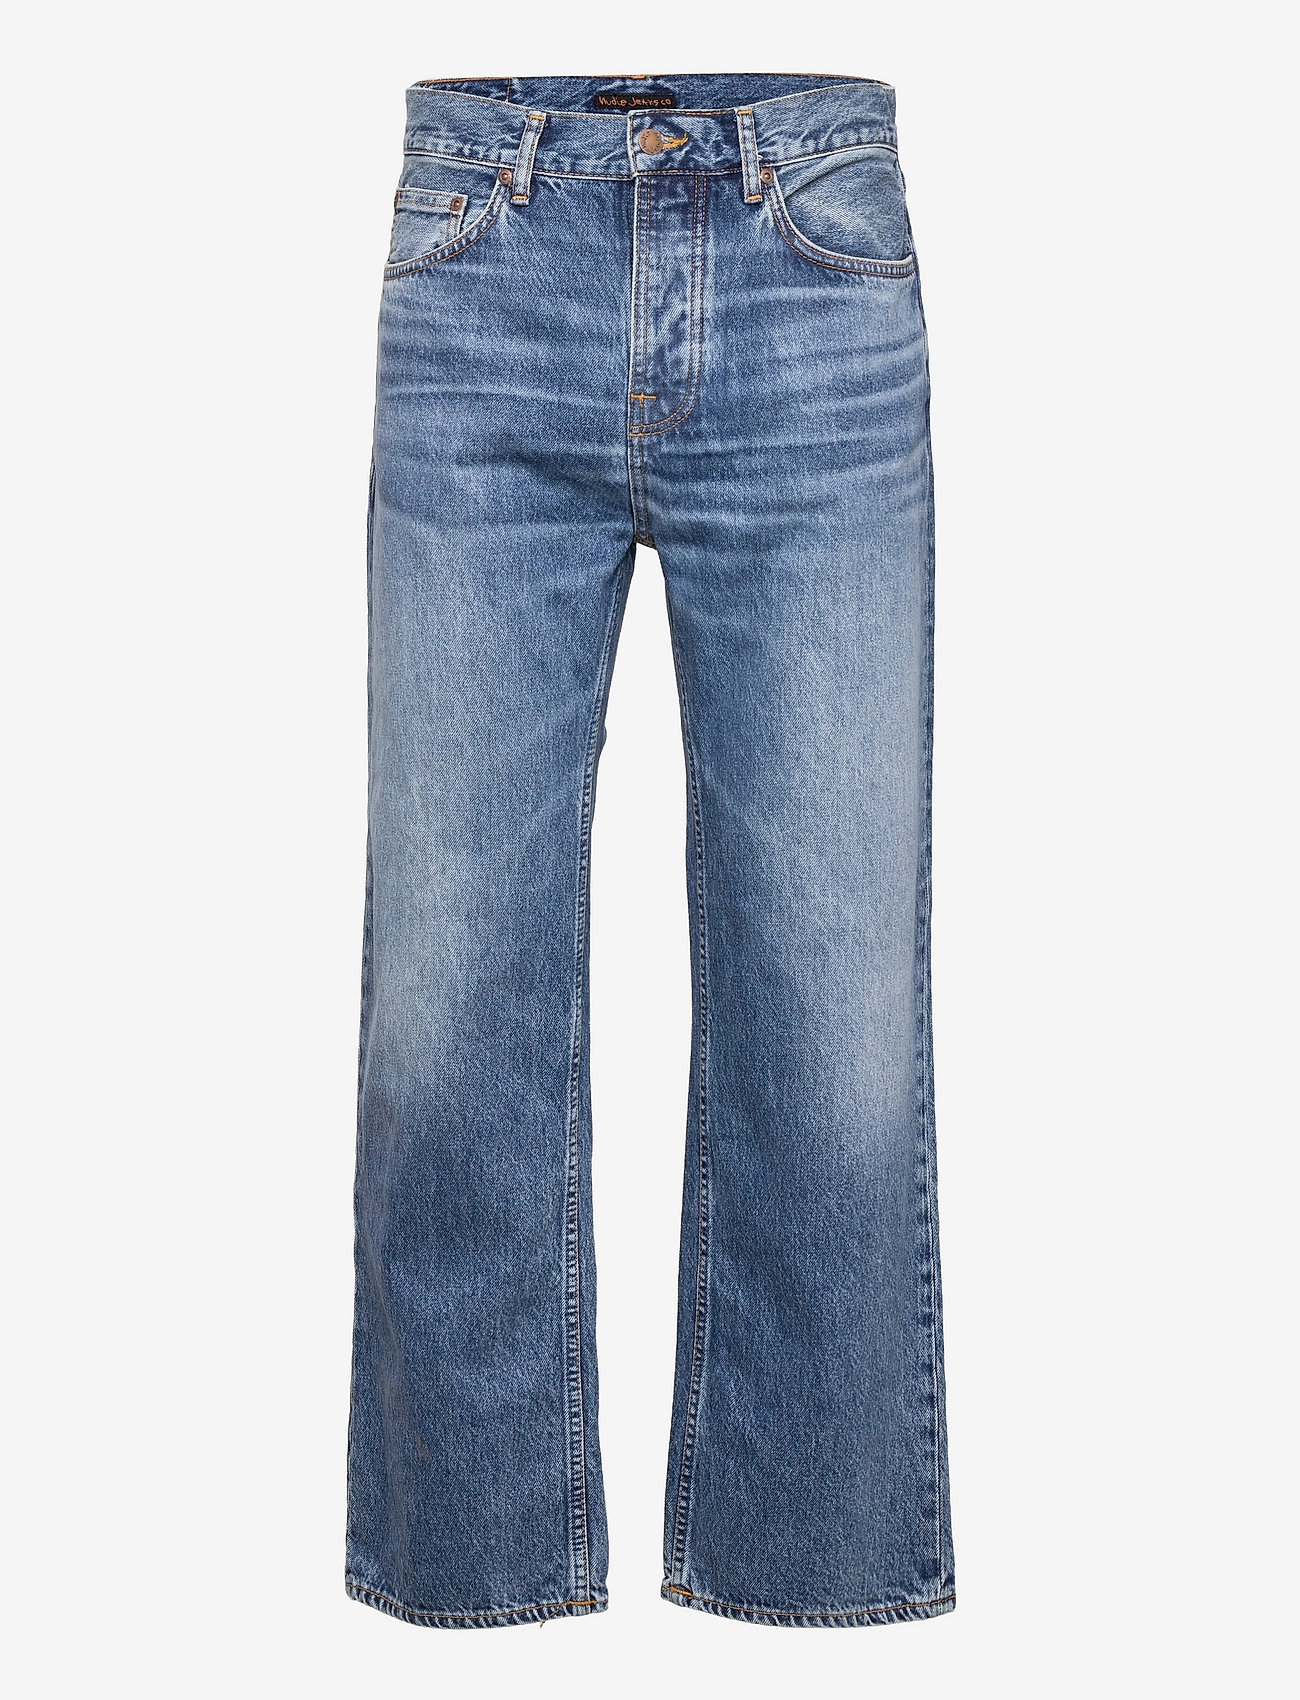 Nudie Jeans - Tuff Tony - relaxed jeans - indigo travel - 1